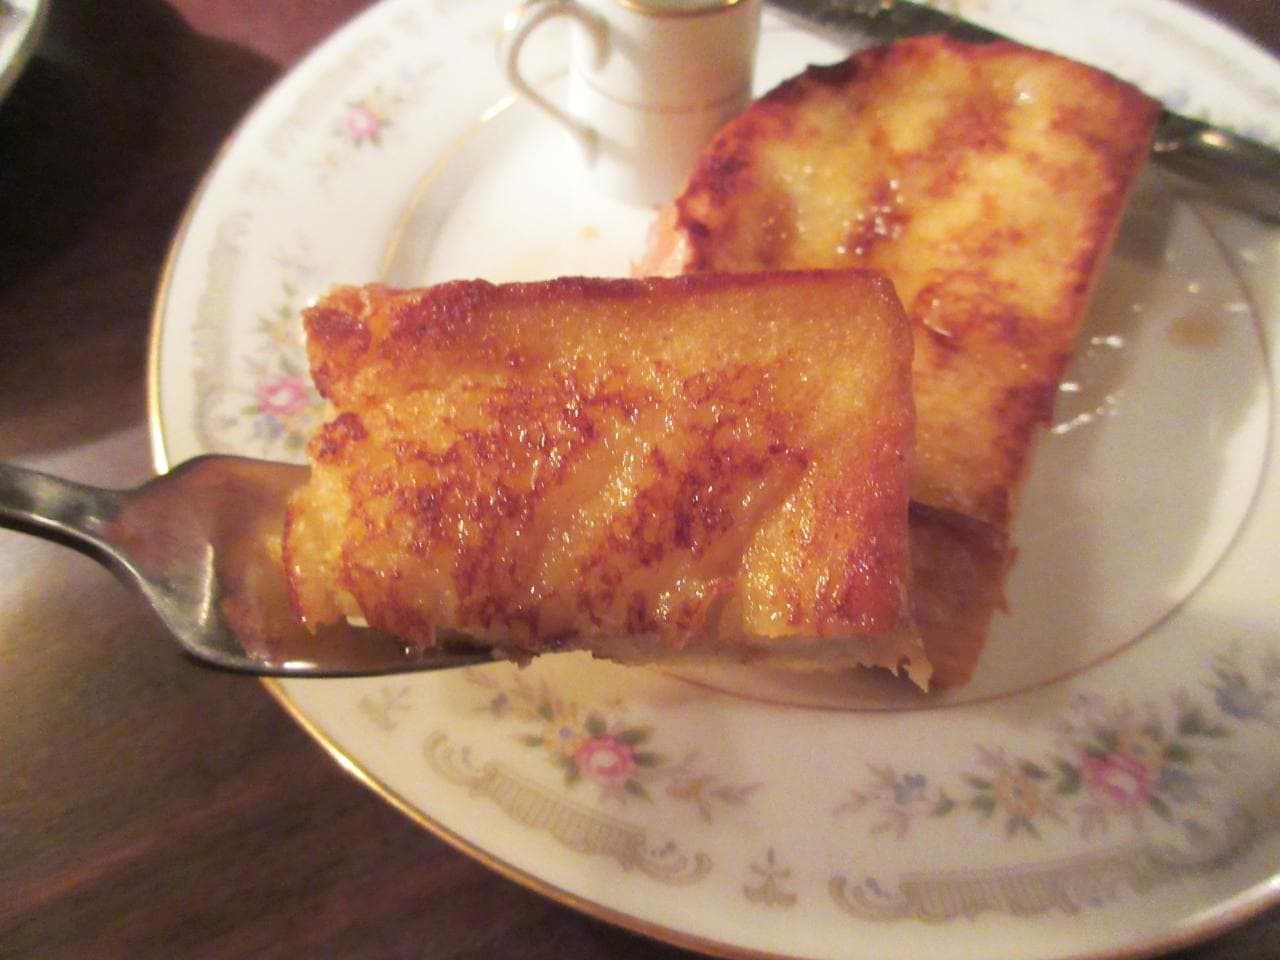 "French toast" from Gakugei University "Equal temperament"